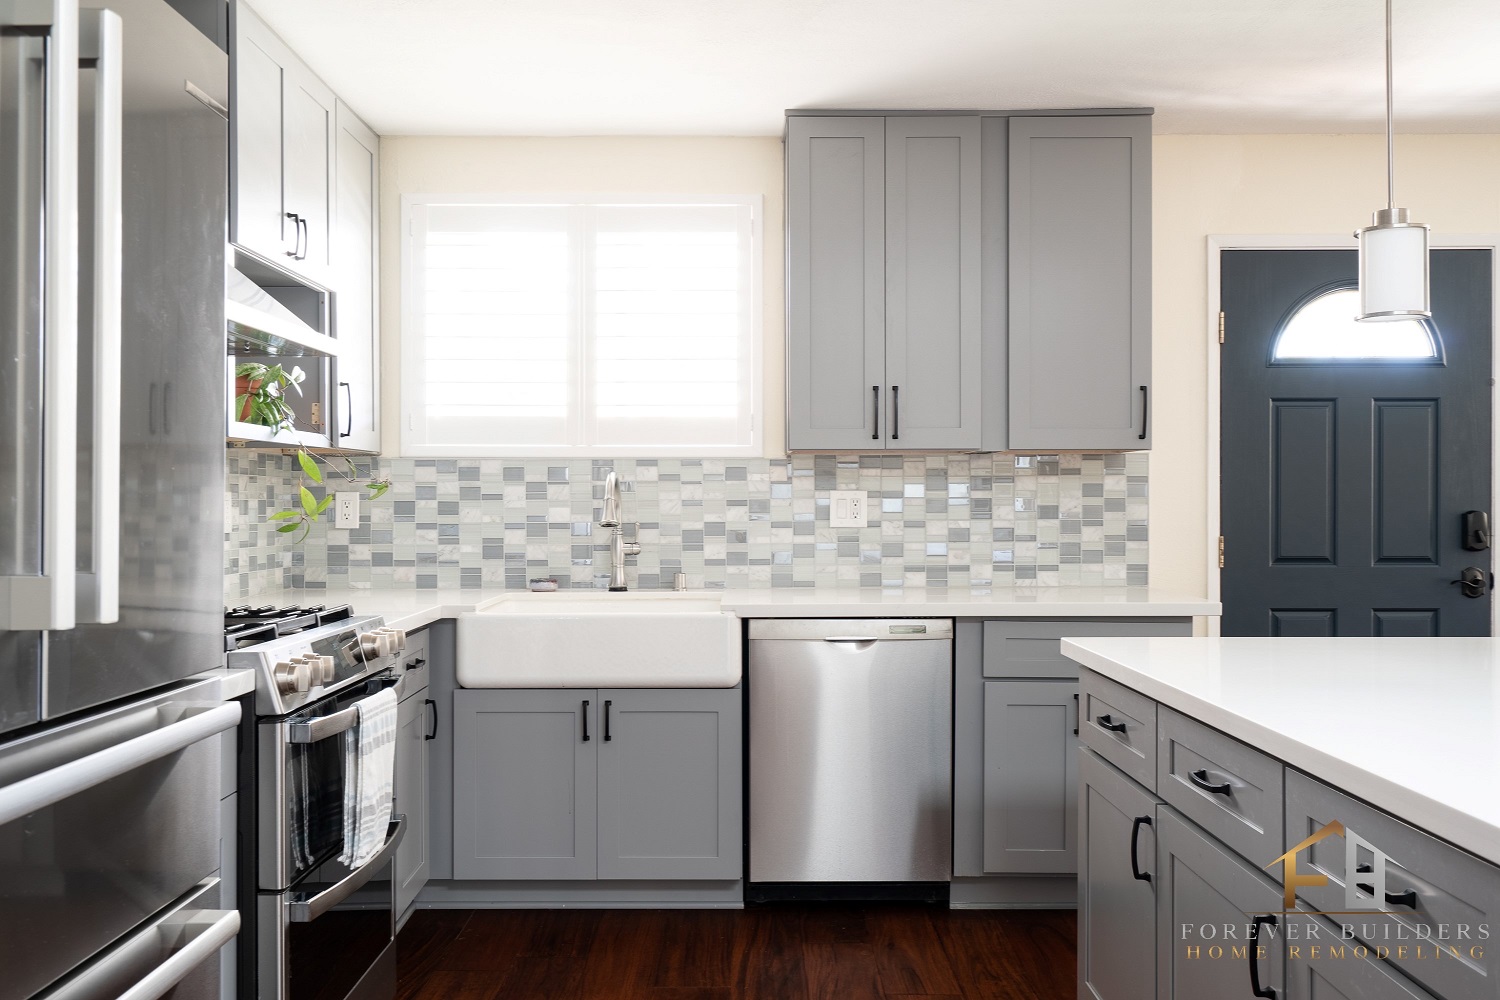 Kitchen Cabinets replacement experts San Diego